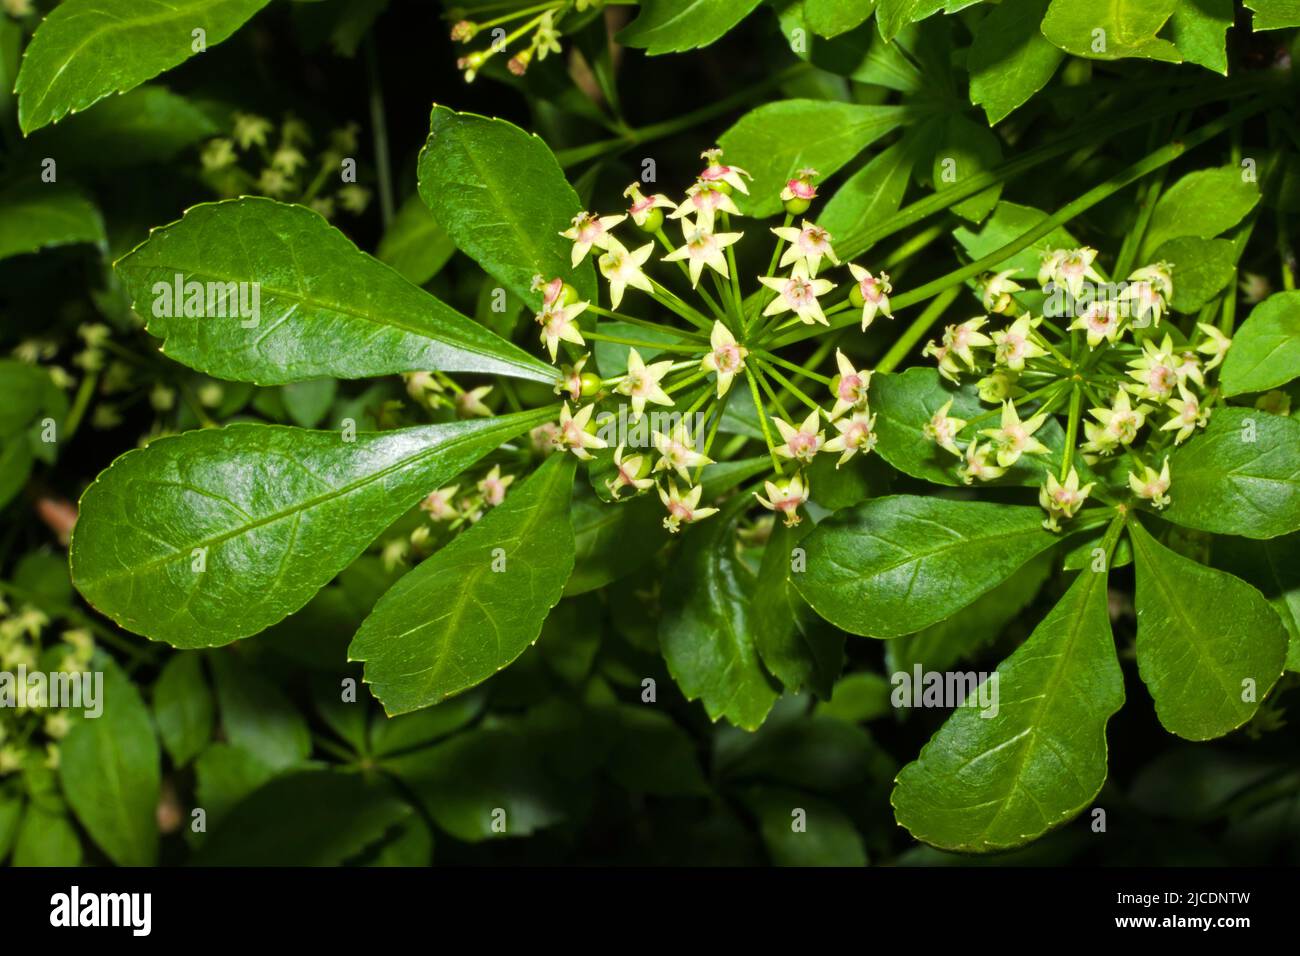 Eleutherococcus sieboldianus (five leaf aralia) is a spiny deciduous shrub native to Anhui province in China but introduced elsewhere for gardens. Stock Photo